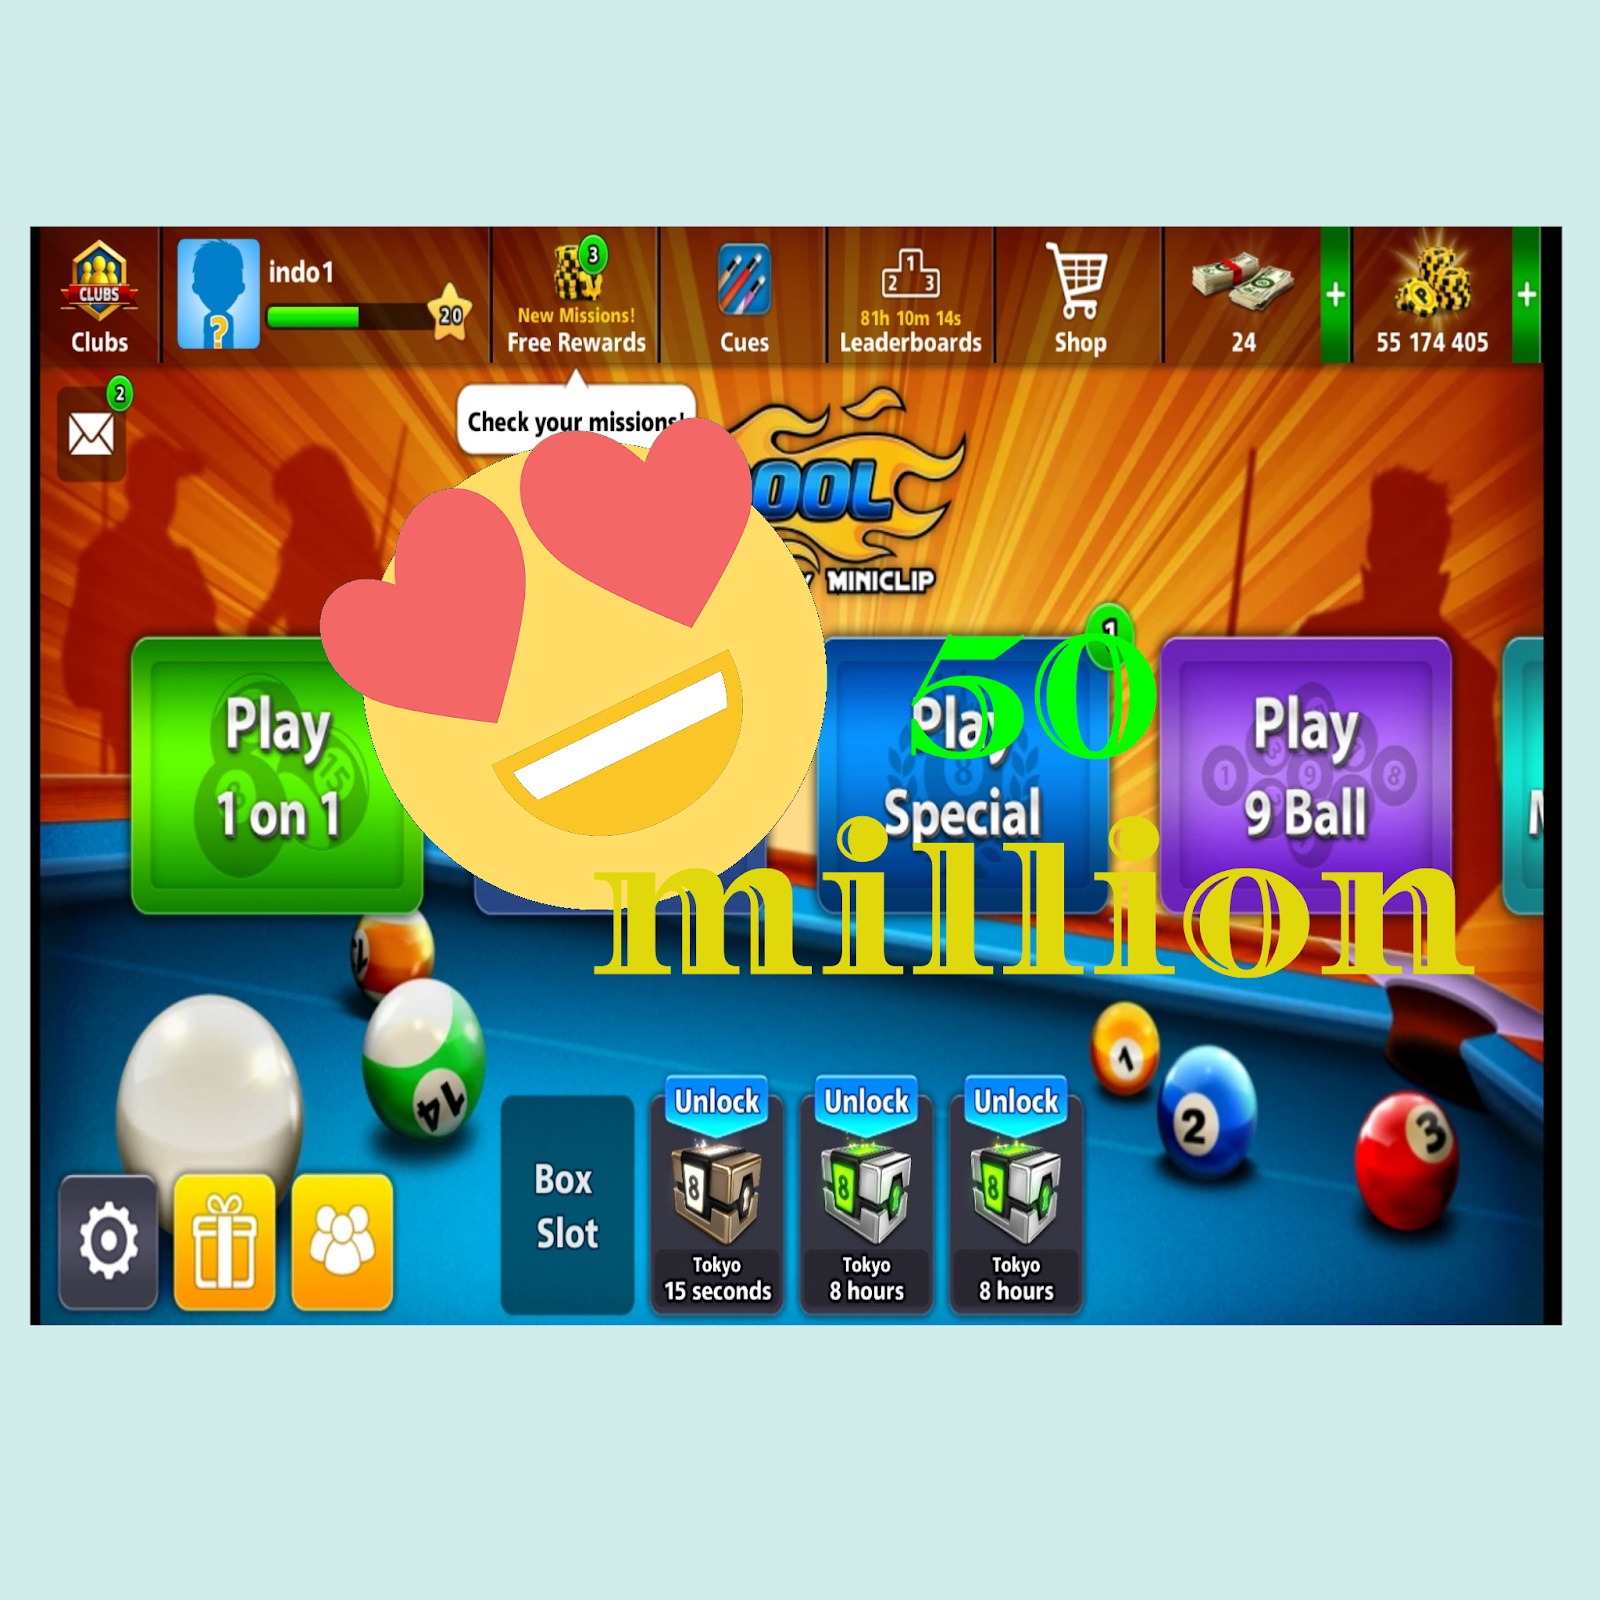 8 Ball Pool Coins Free 50 Million Every Week